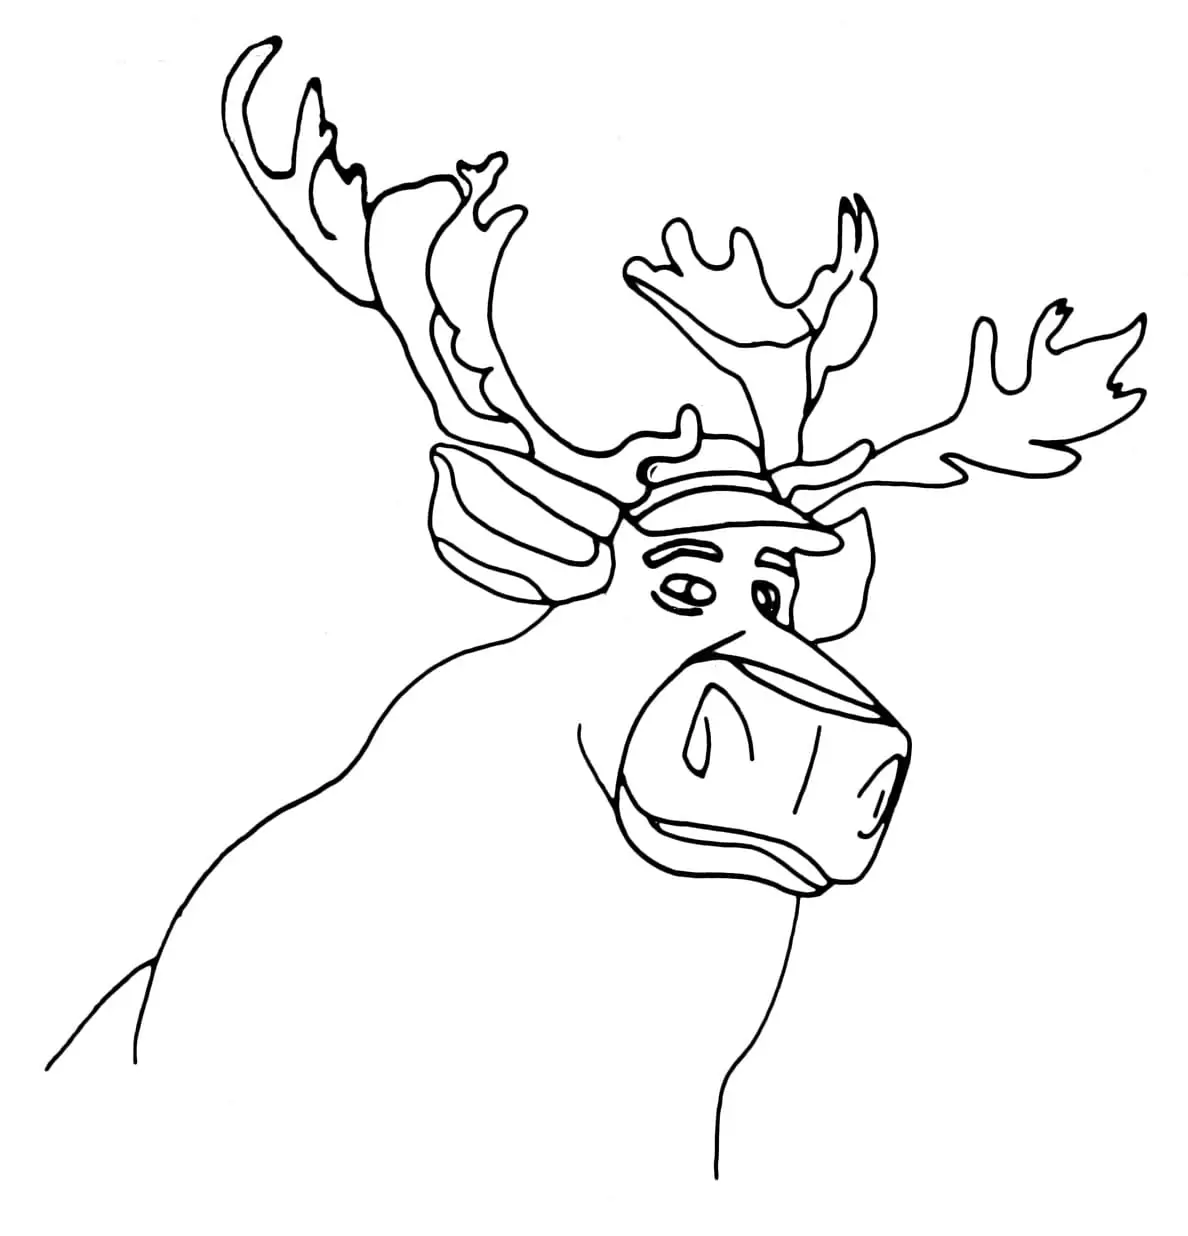 Caribou Reindeer from Norm of the North